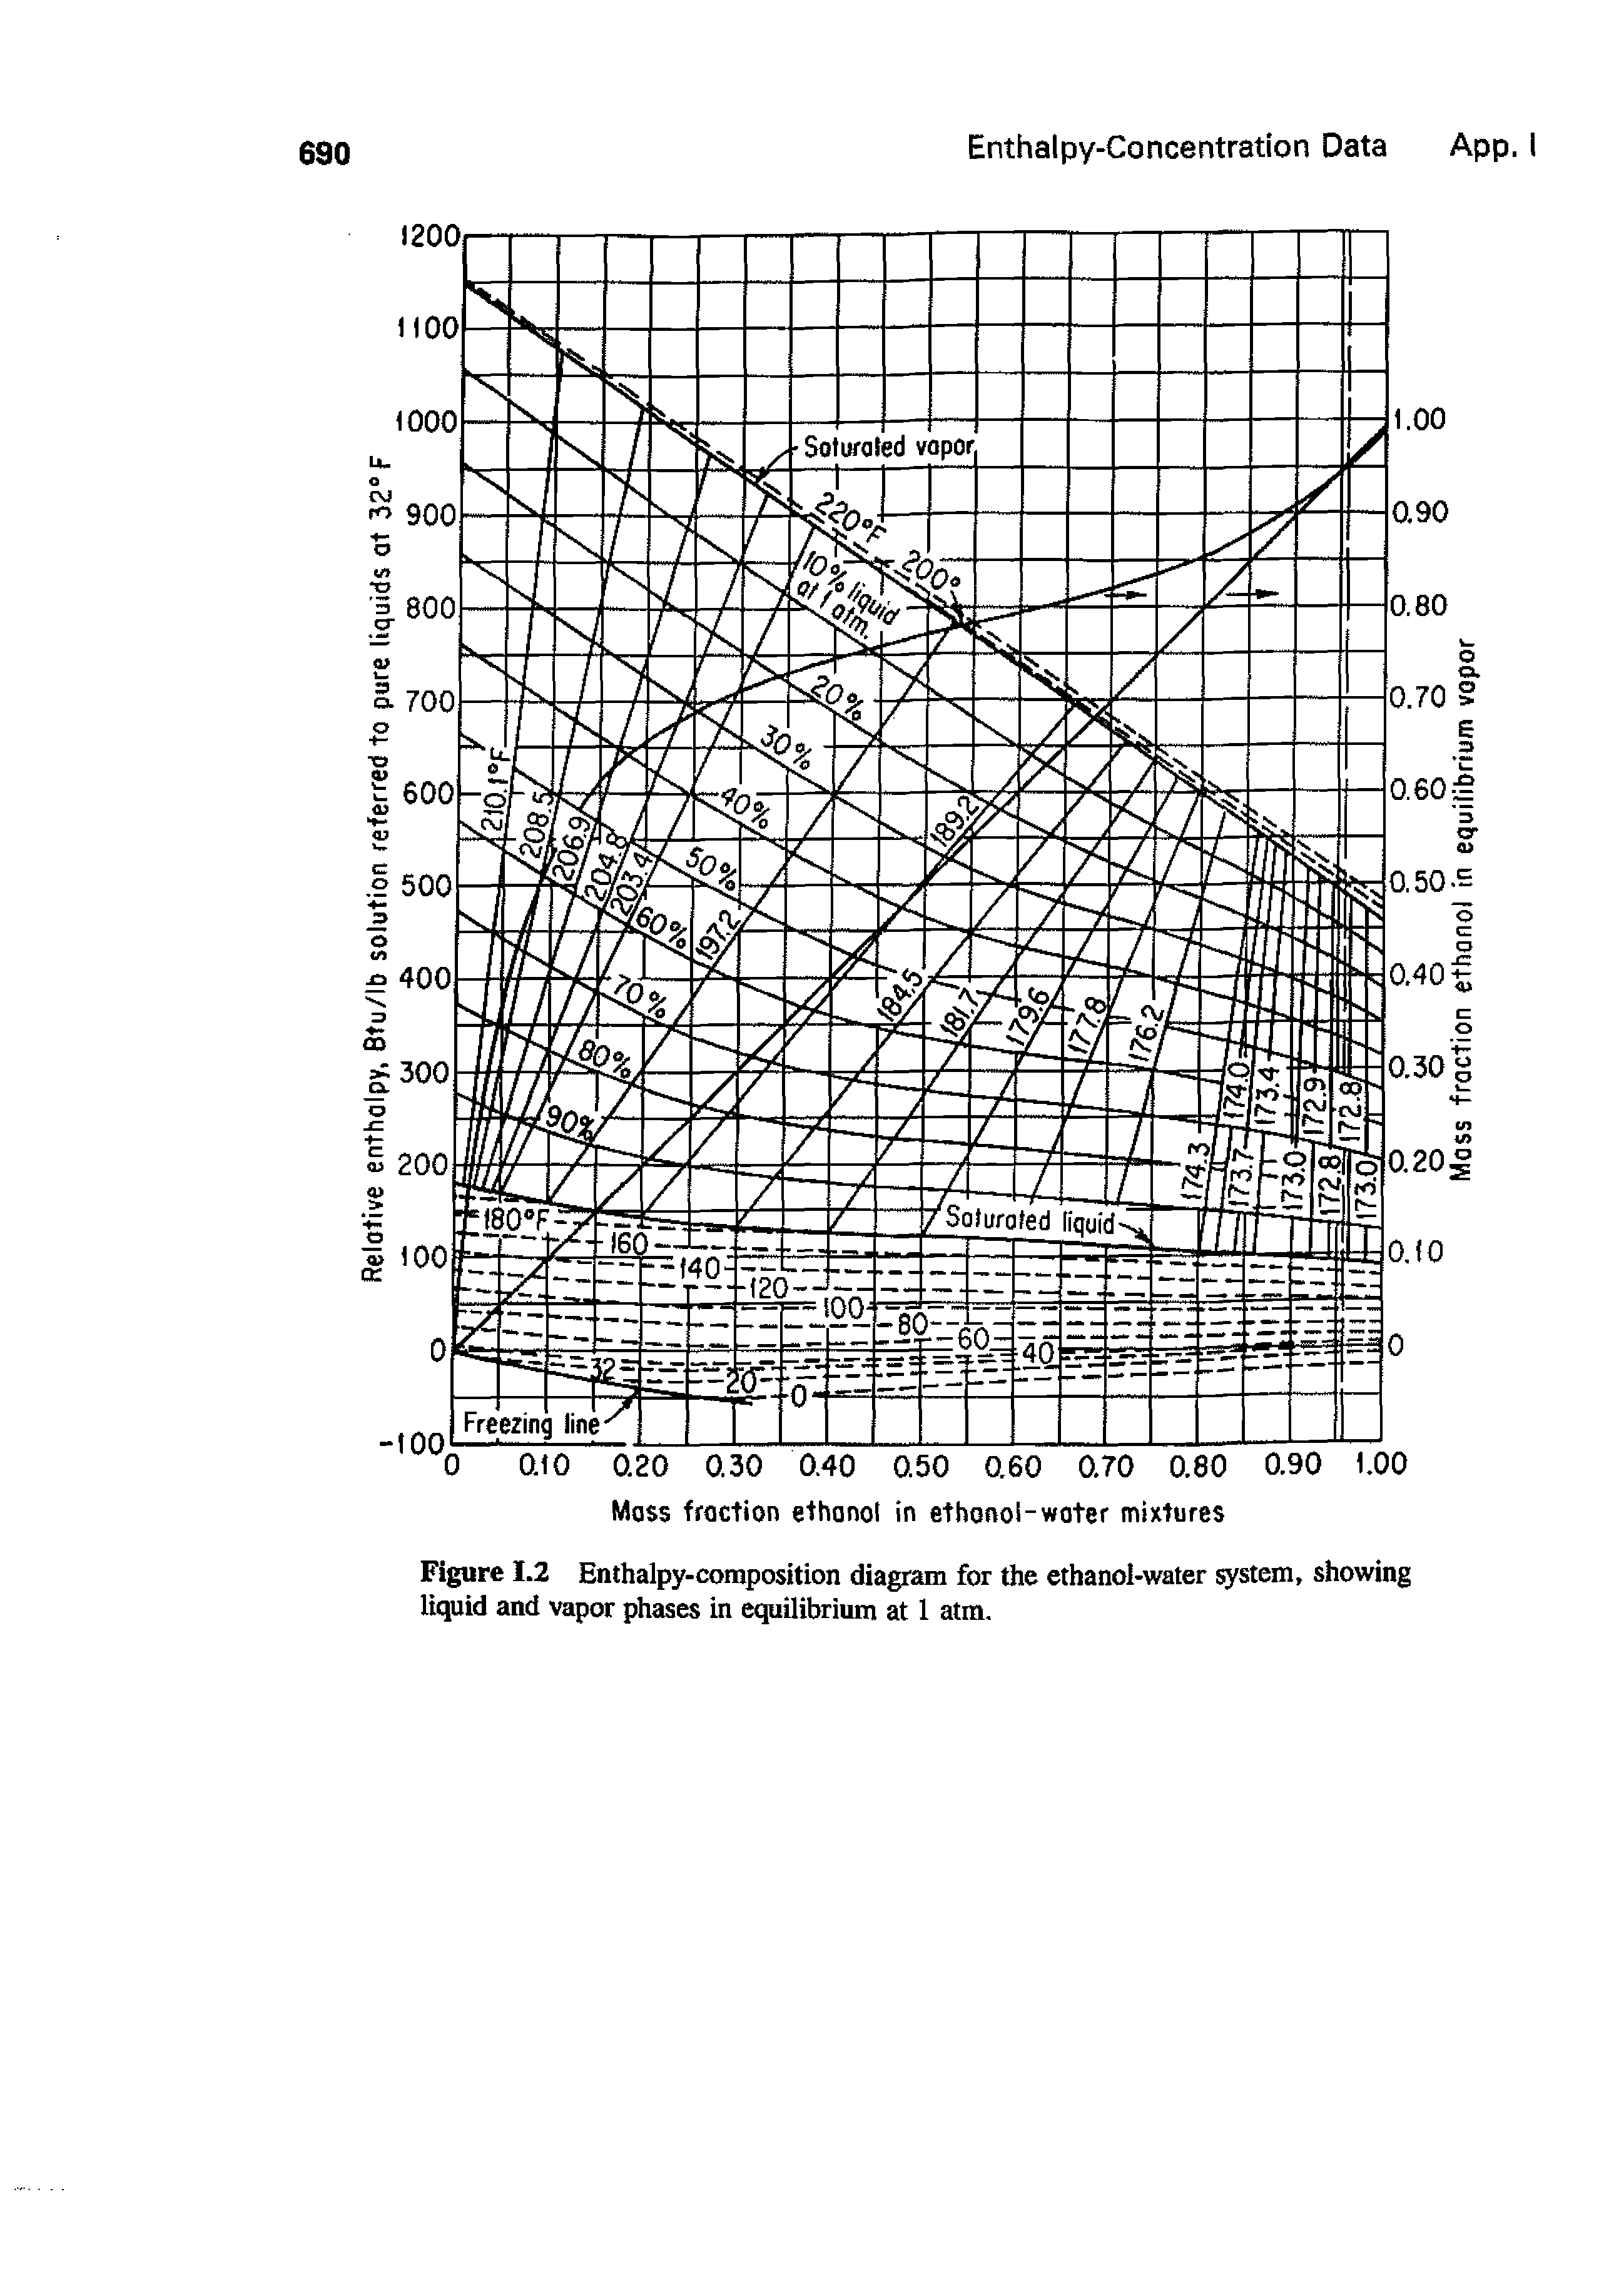 Figure 1.2 Enthalpy-composition diagram for the ethanol-water stem, showing liquid and vapor phases in equilibrium at 1 atm.